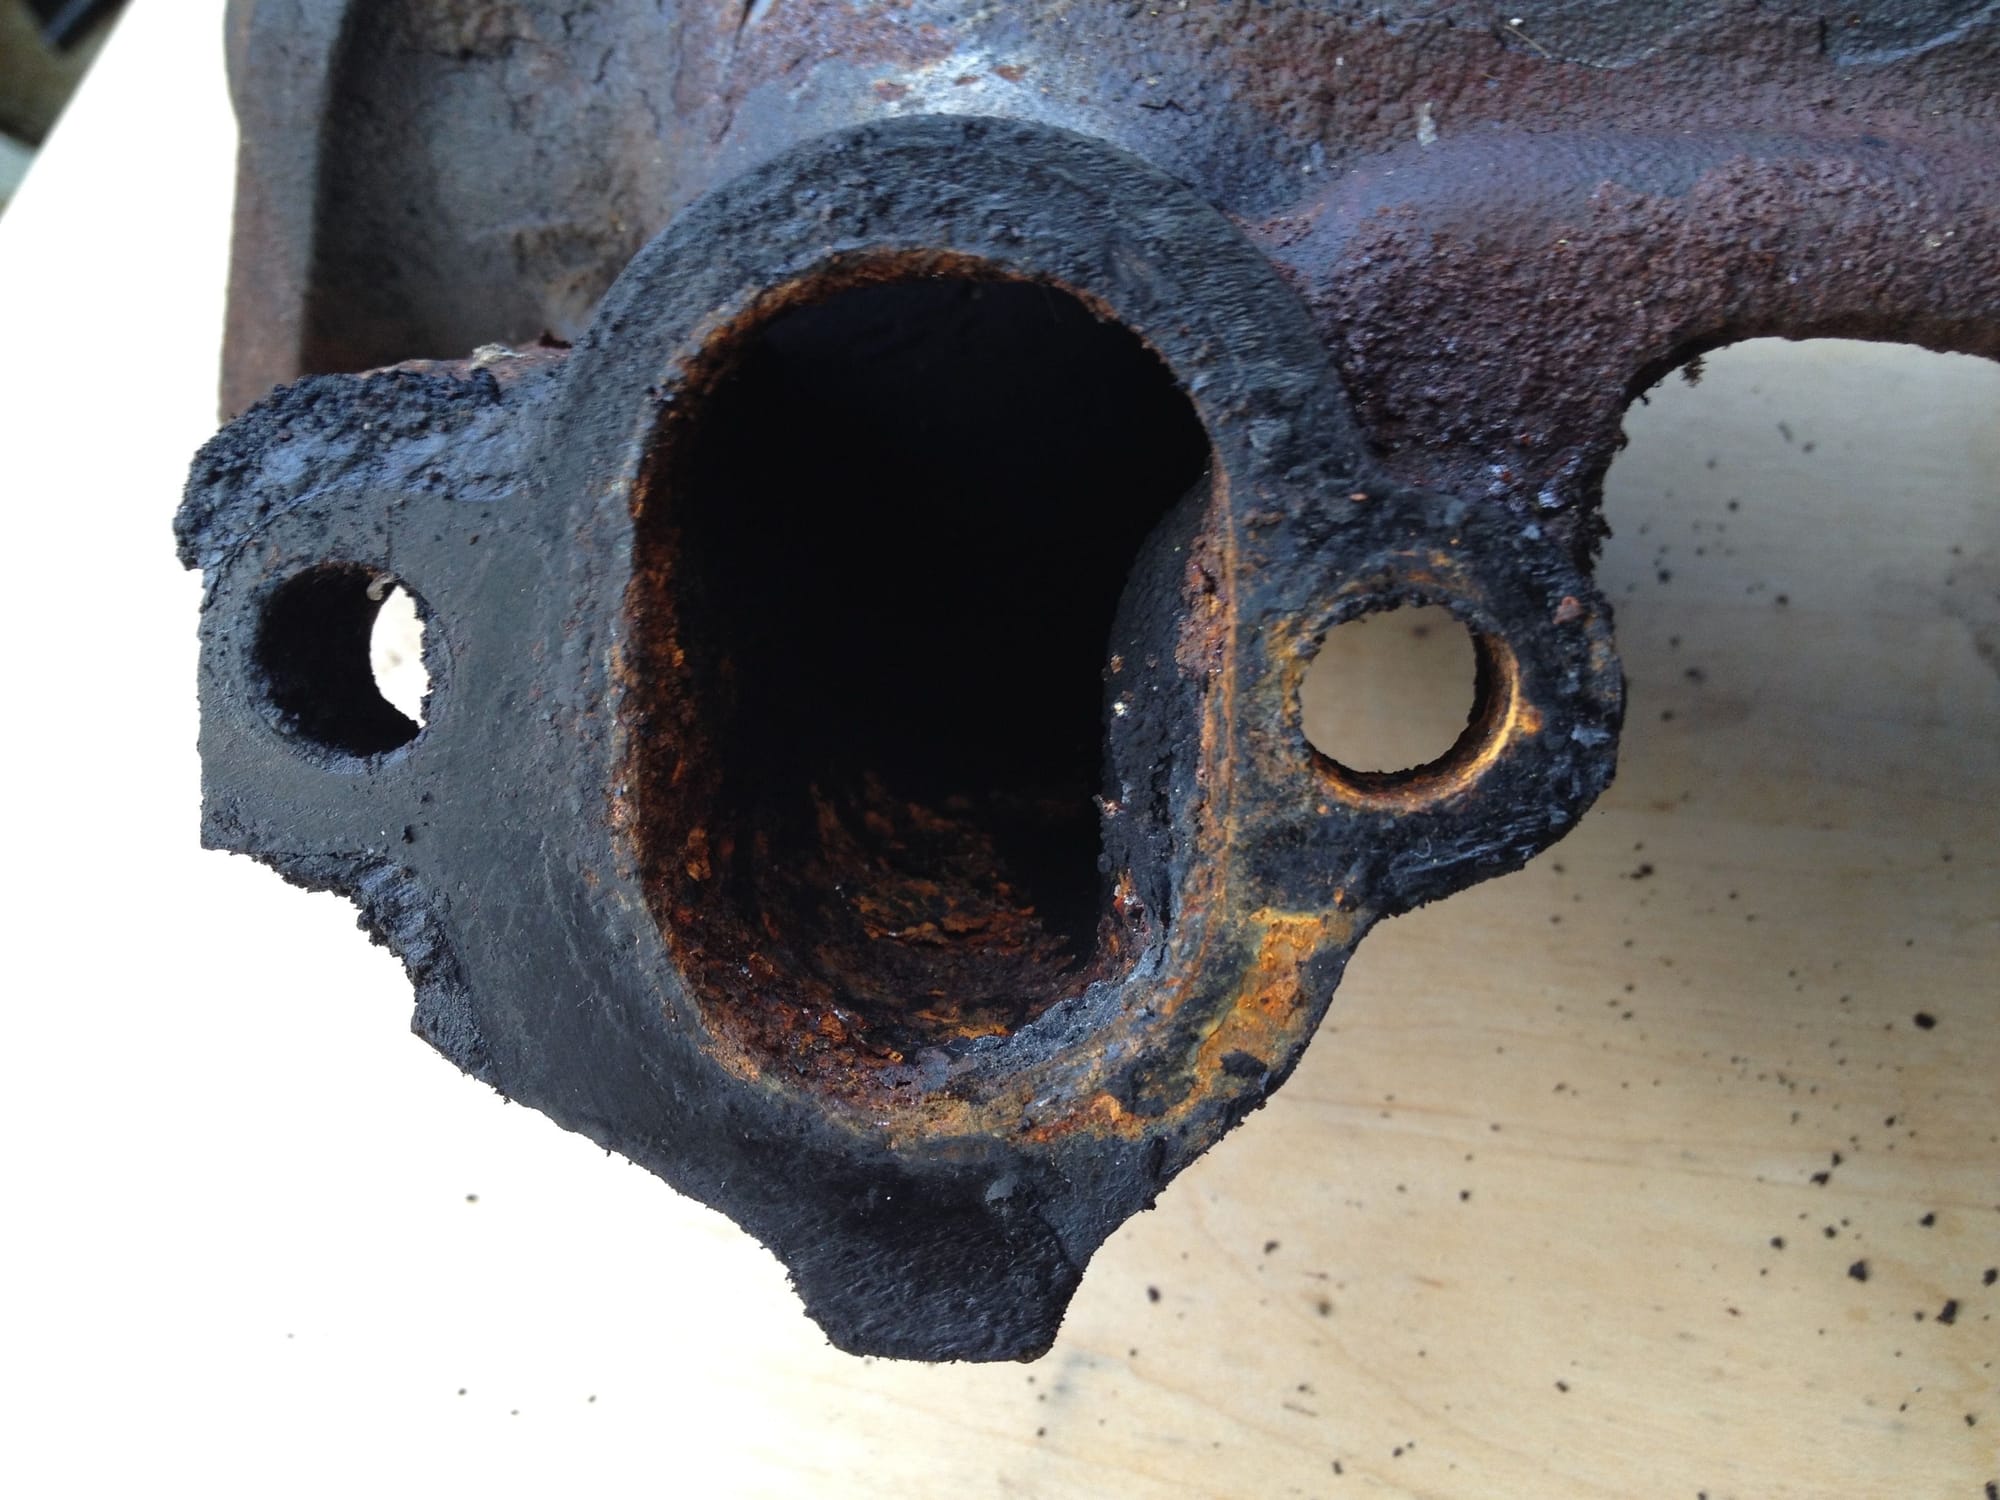 460 Exhaust Manifold Quiz... (pics) - Ford Truck Enthusiasts Forums